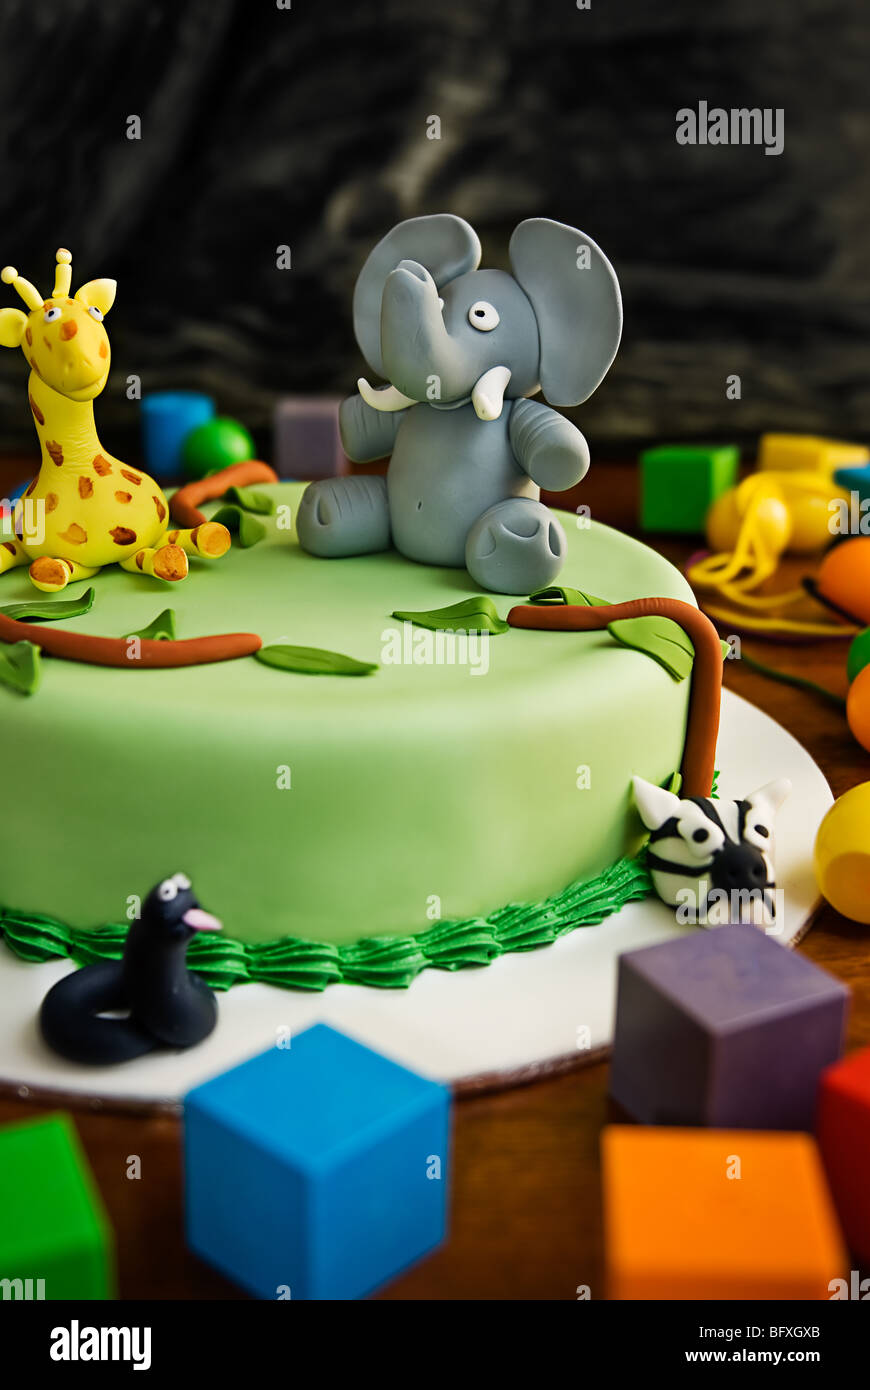 Jungle themed birthday cake with an elephant and giraffe on top, surrounded by building blocks. Stock Photo